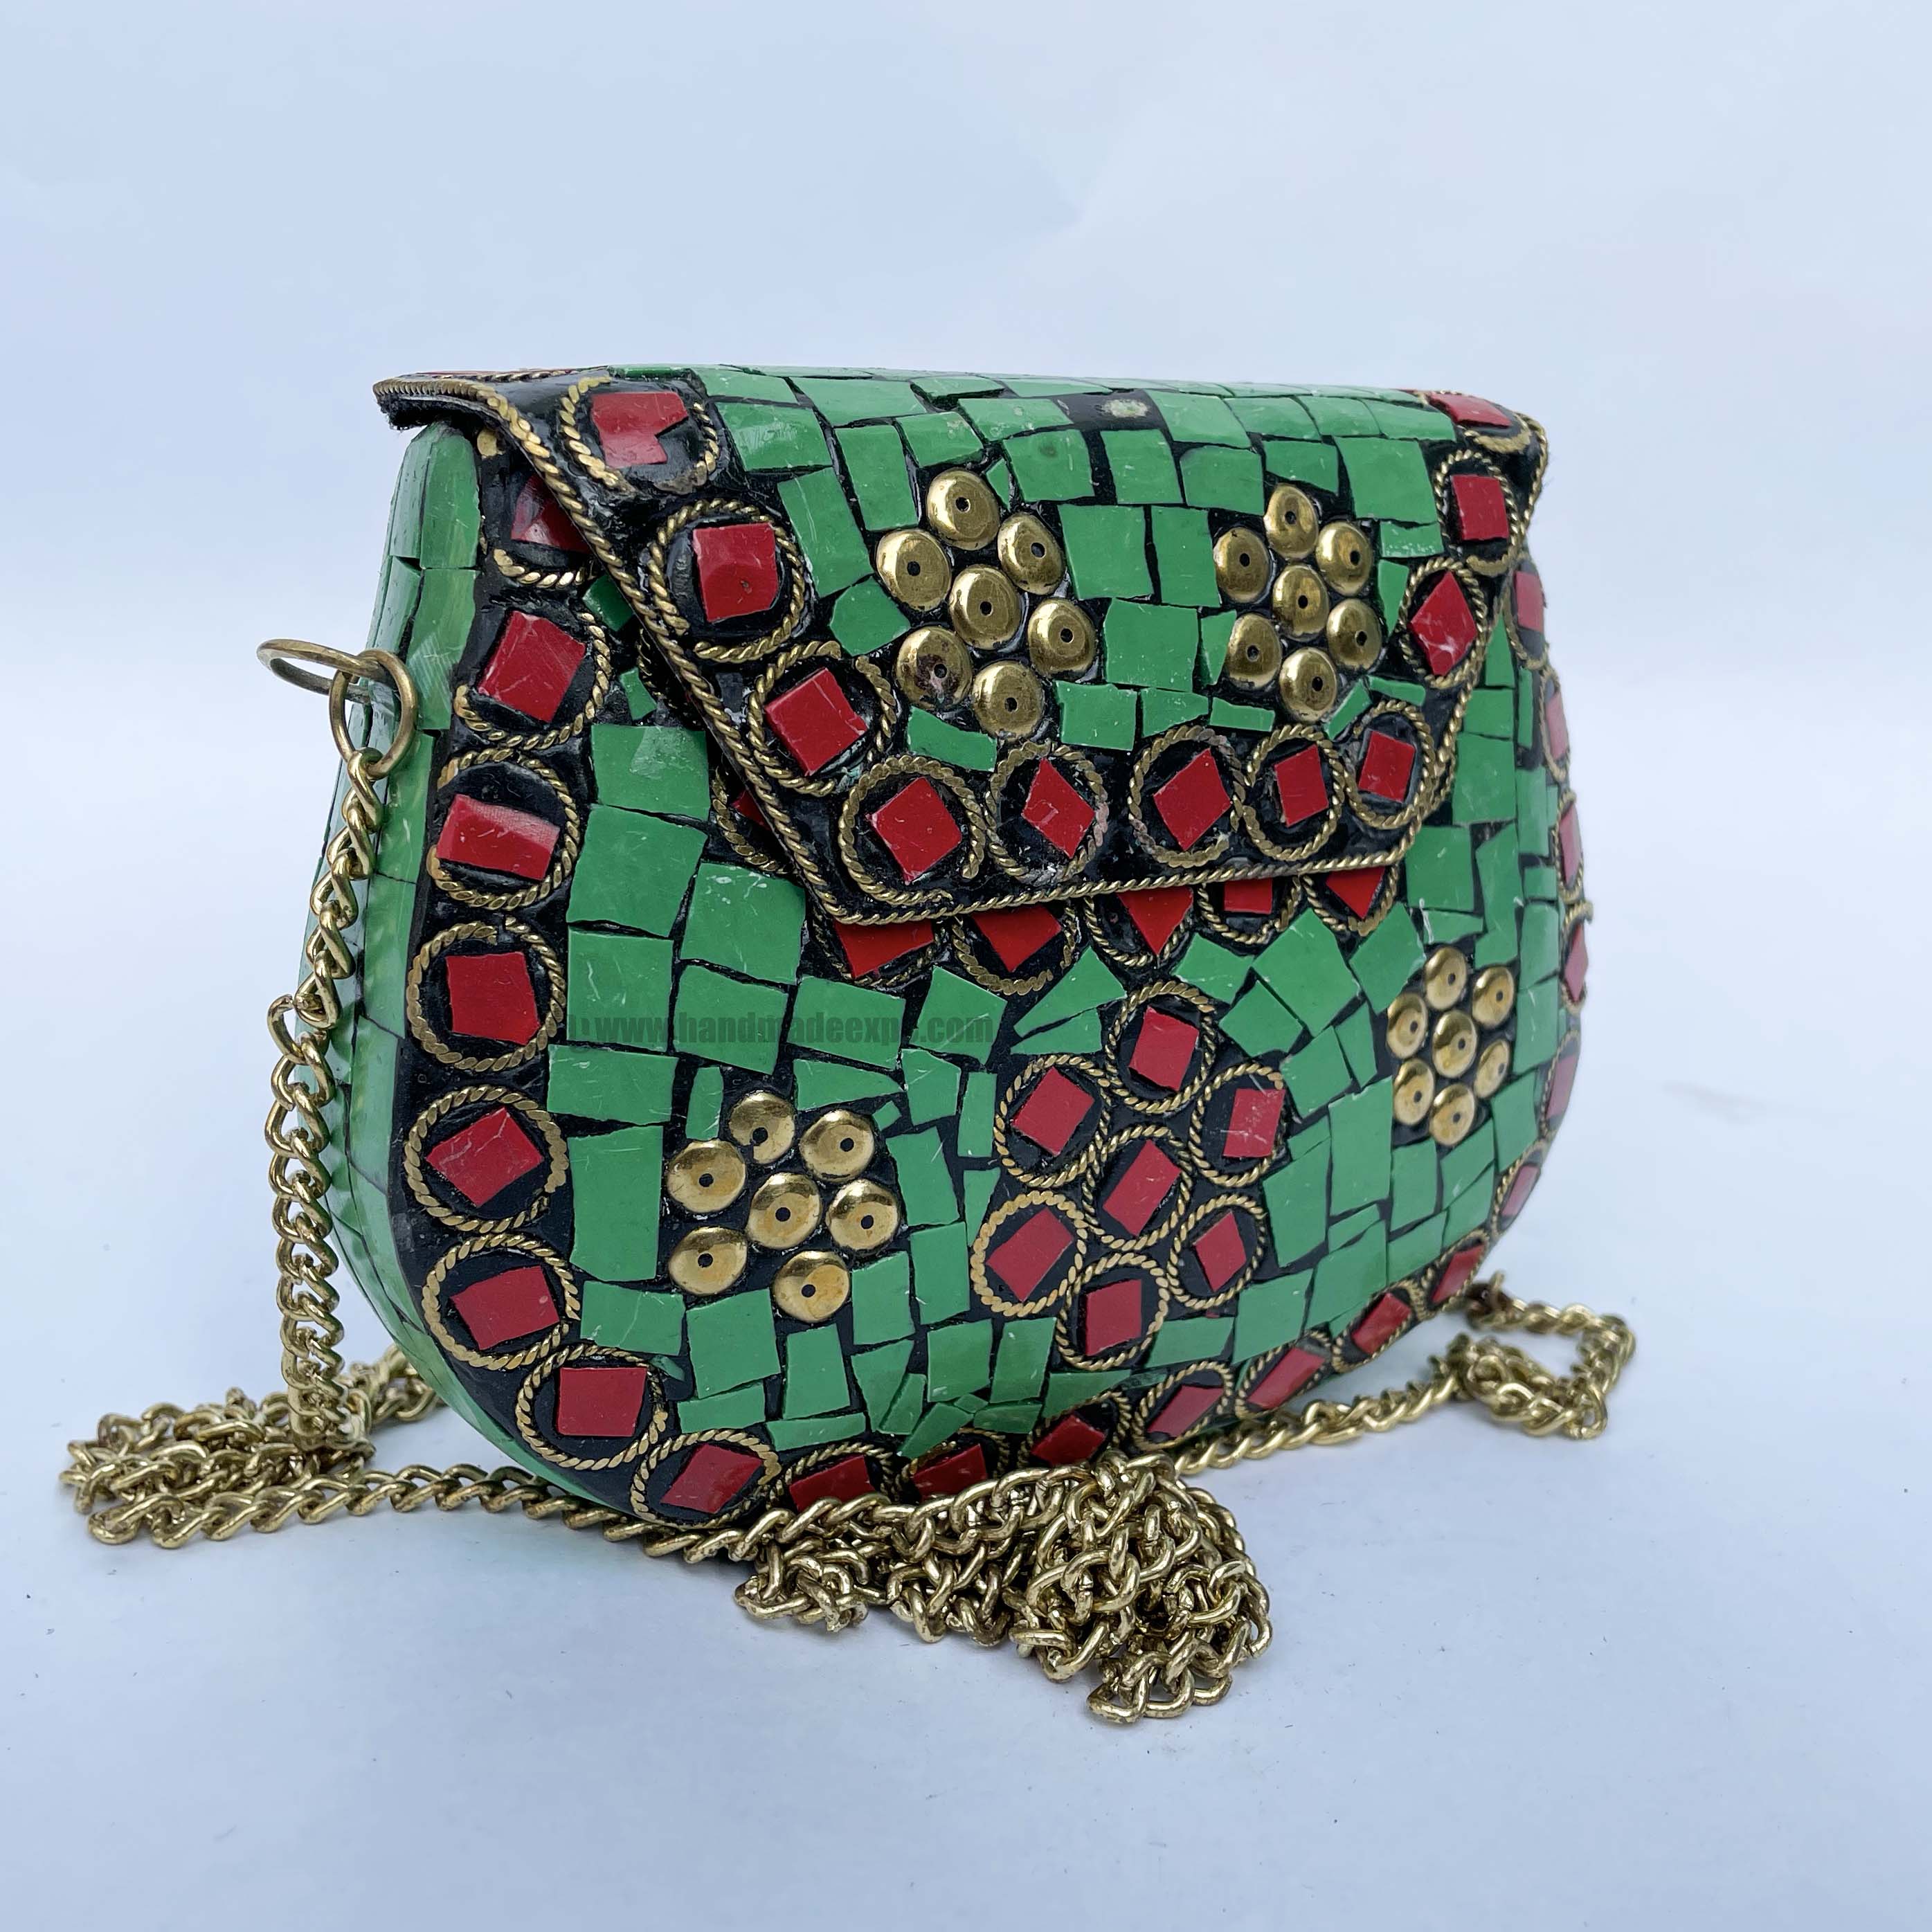 Nepali Handmade Small Ladies Bag With stone Setting, metal, green And Red